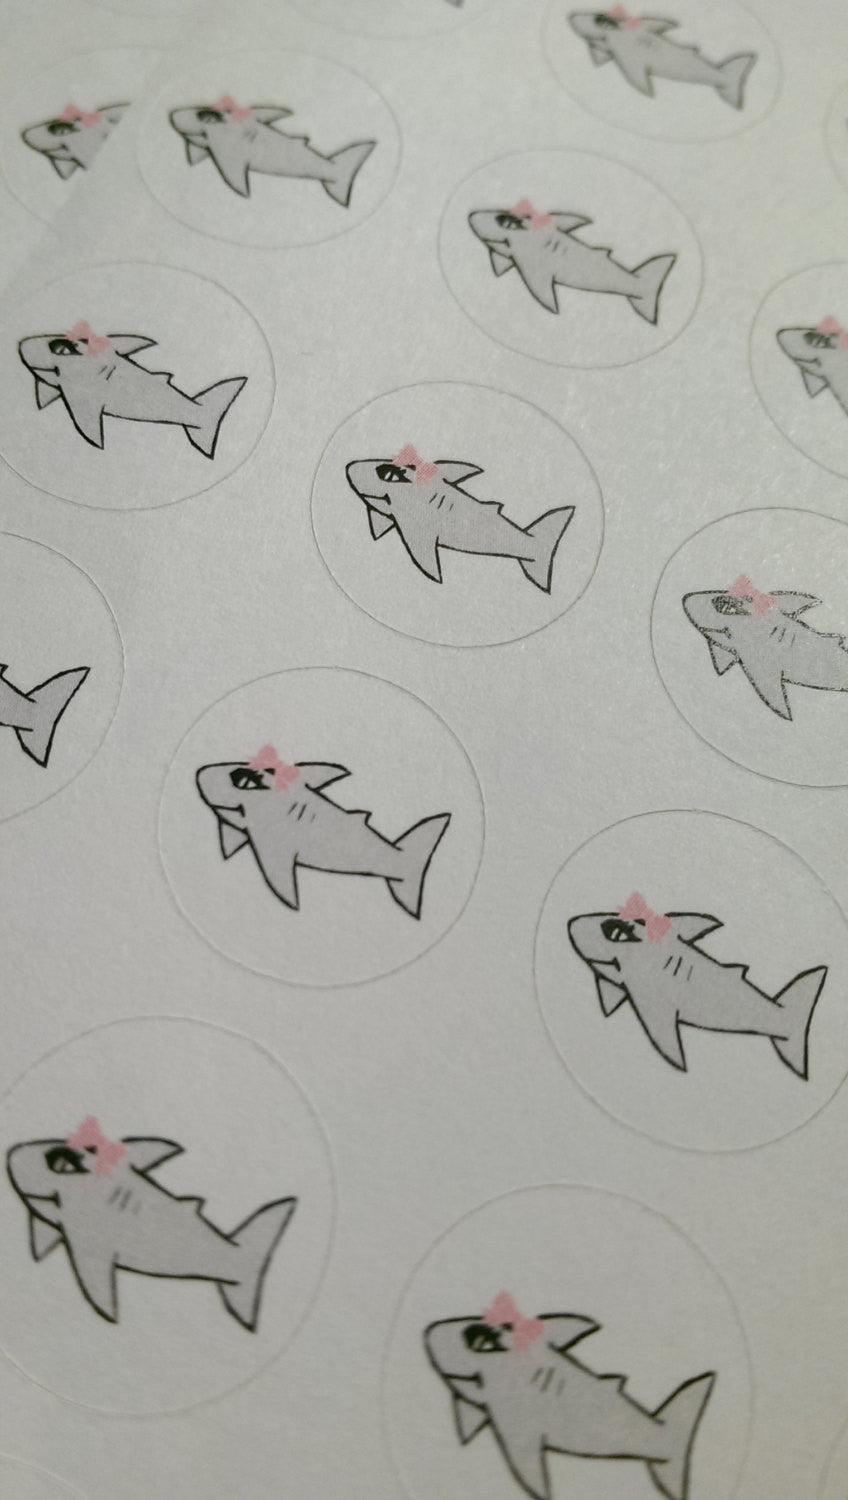 Shark Week Stickers - Period Tracking Icons